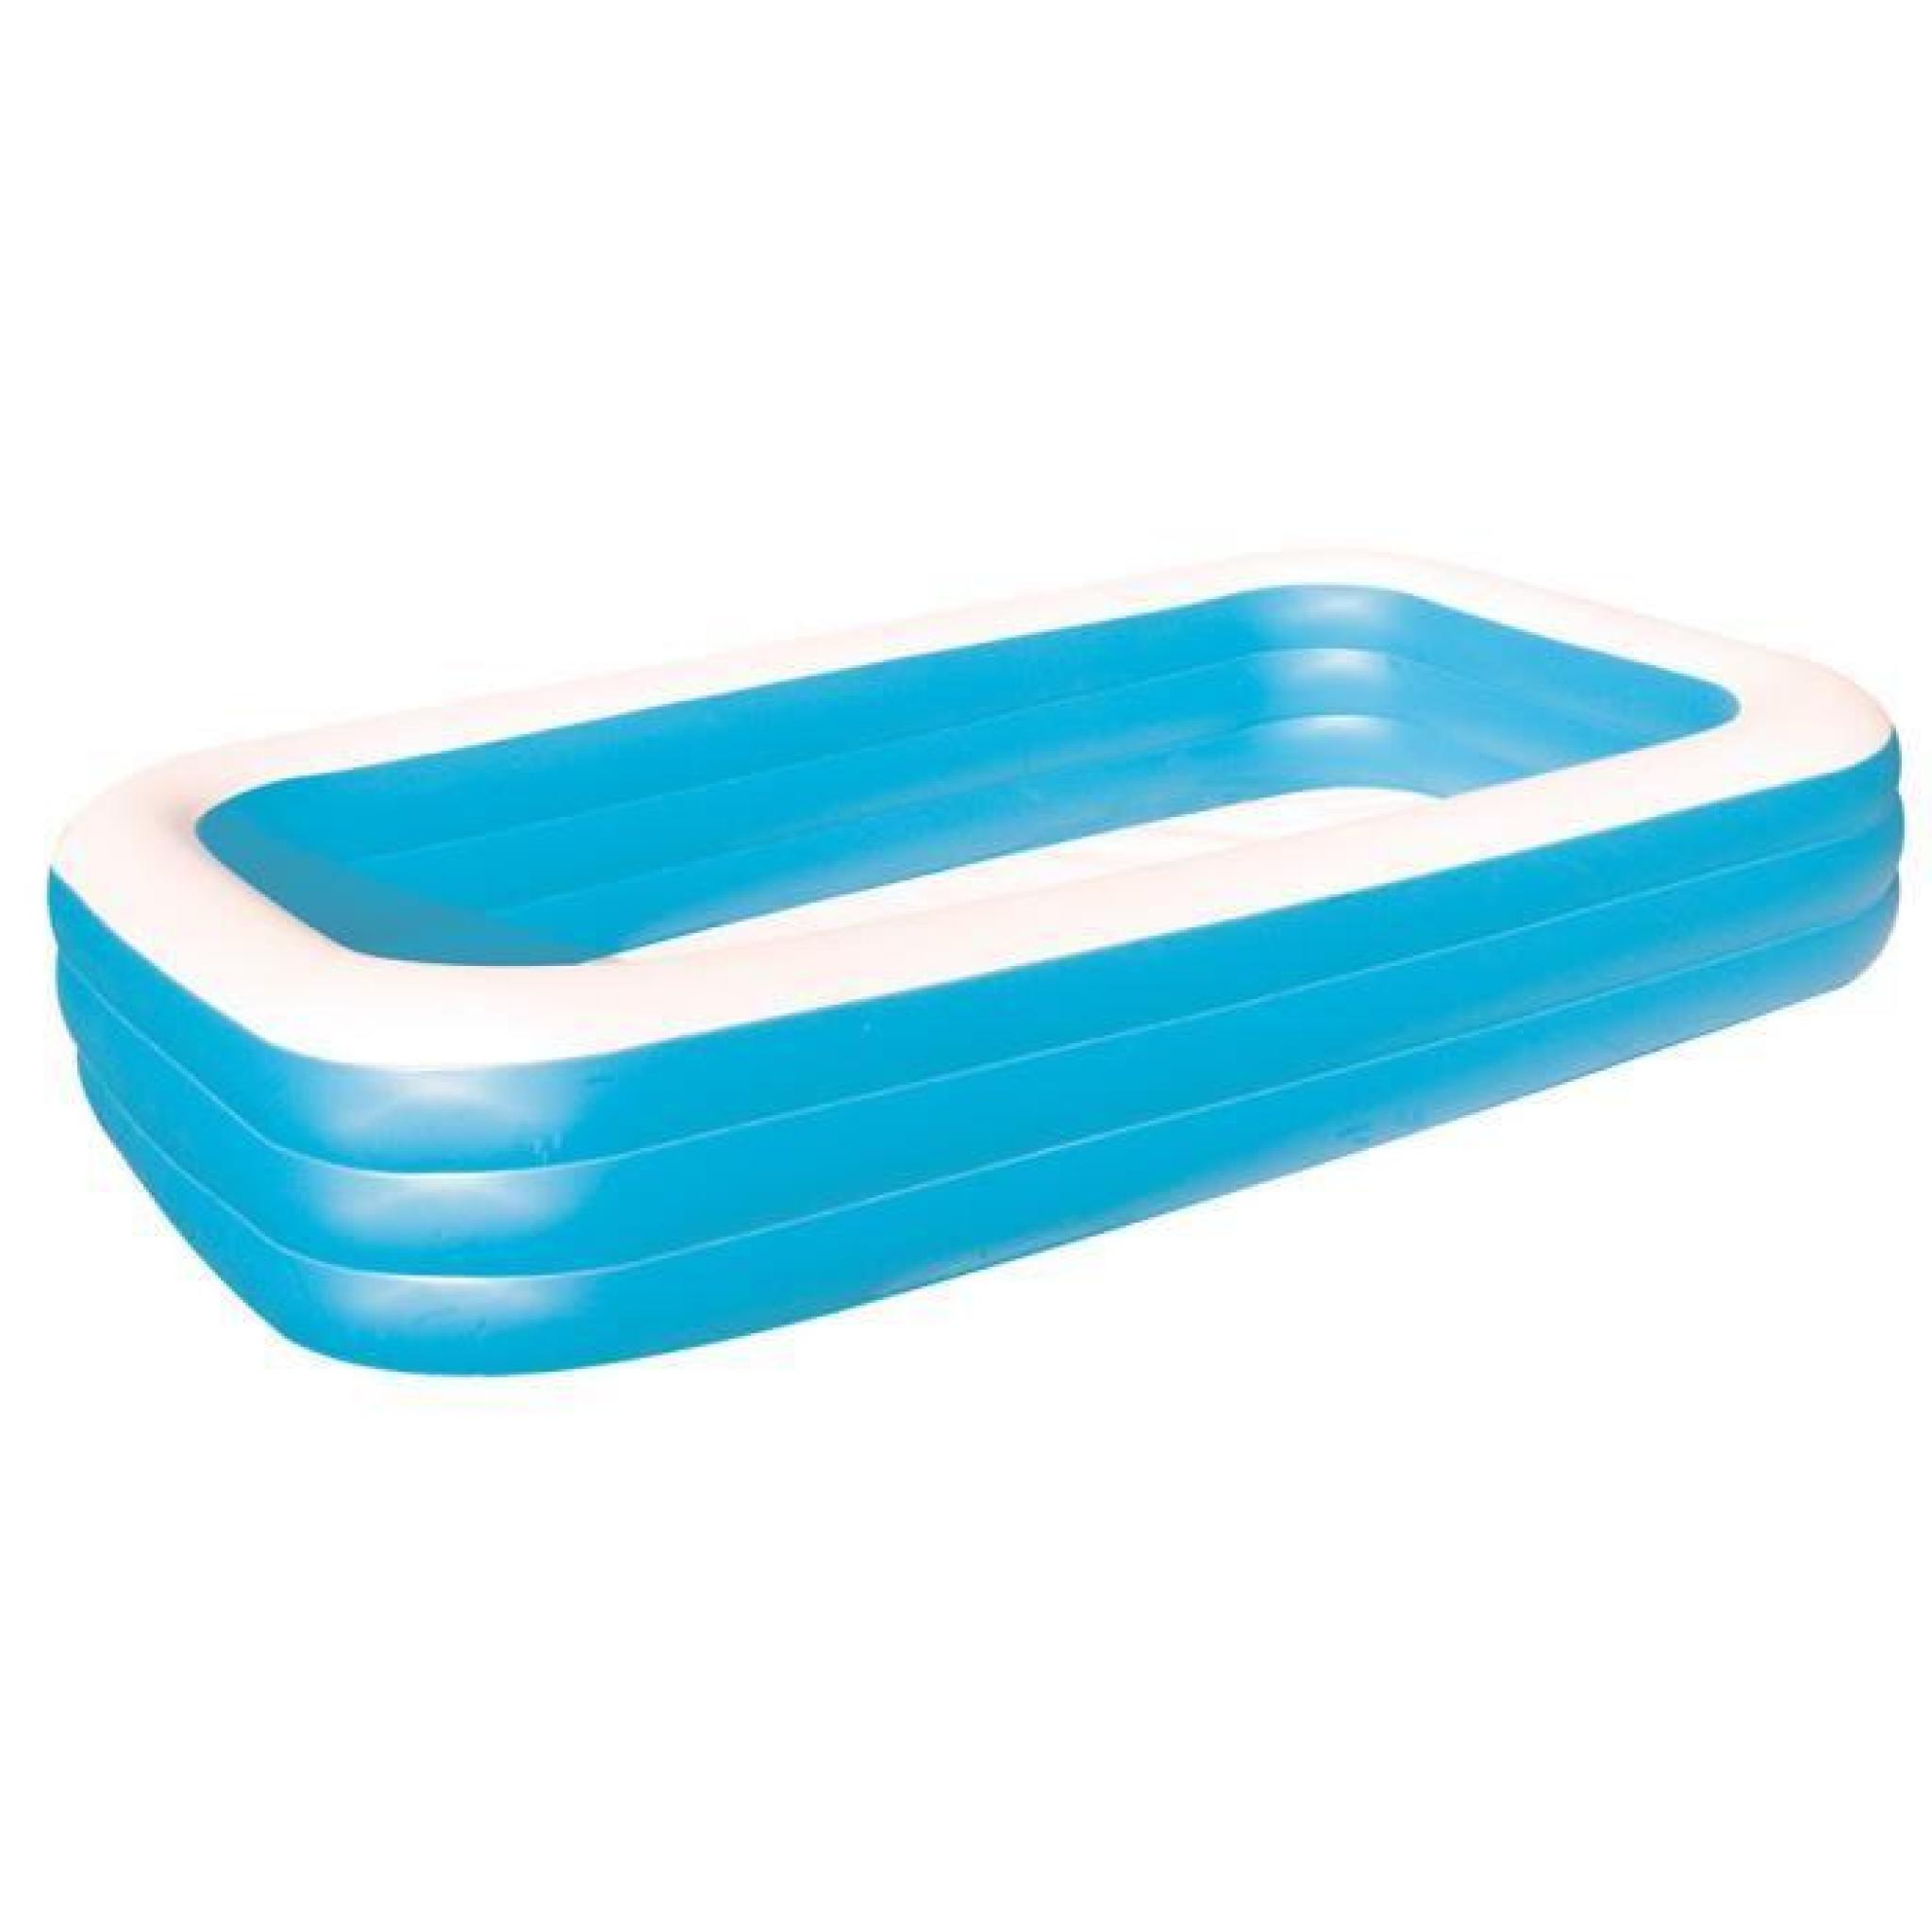 Piscine gonflable  Deluxe - 3.05 x 1.83 x 0.56 m